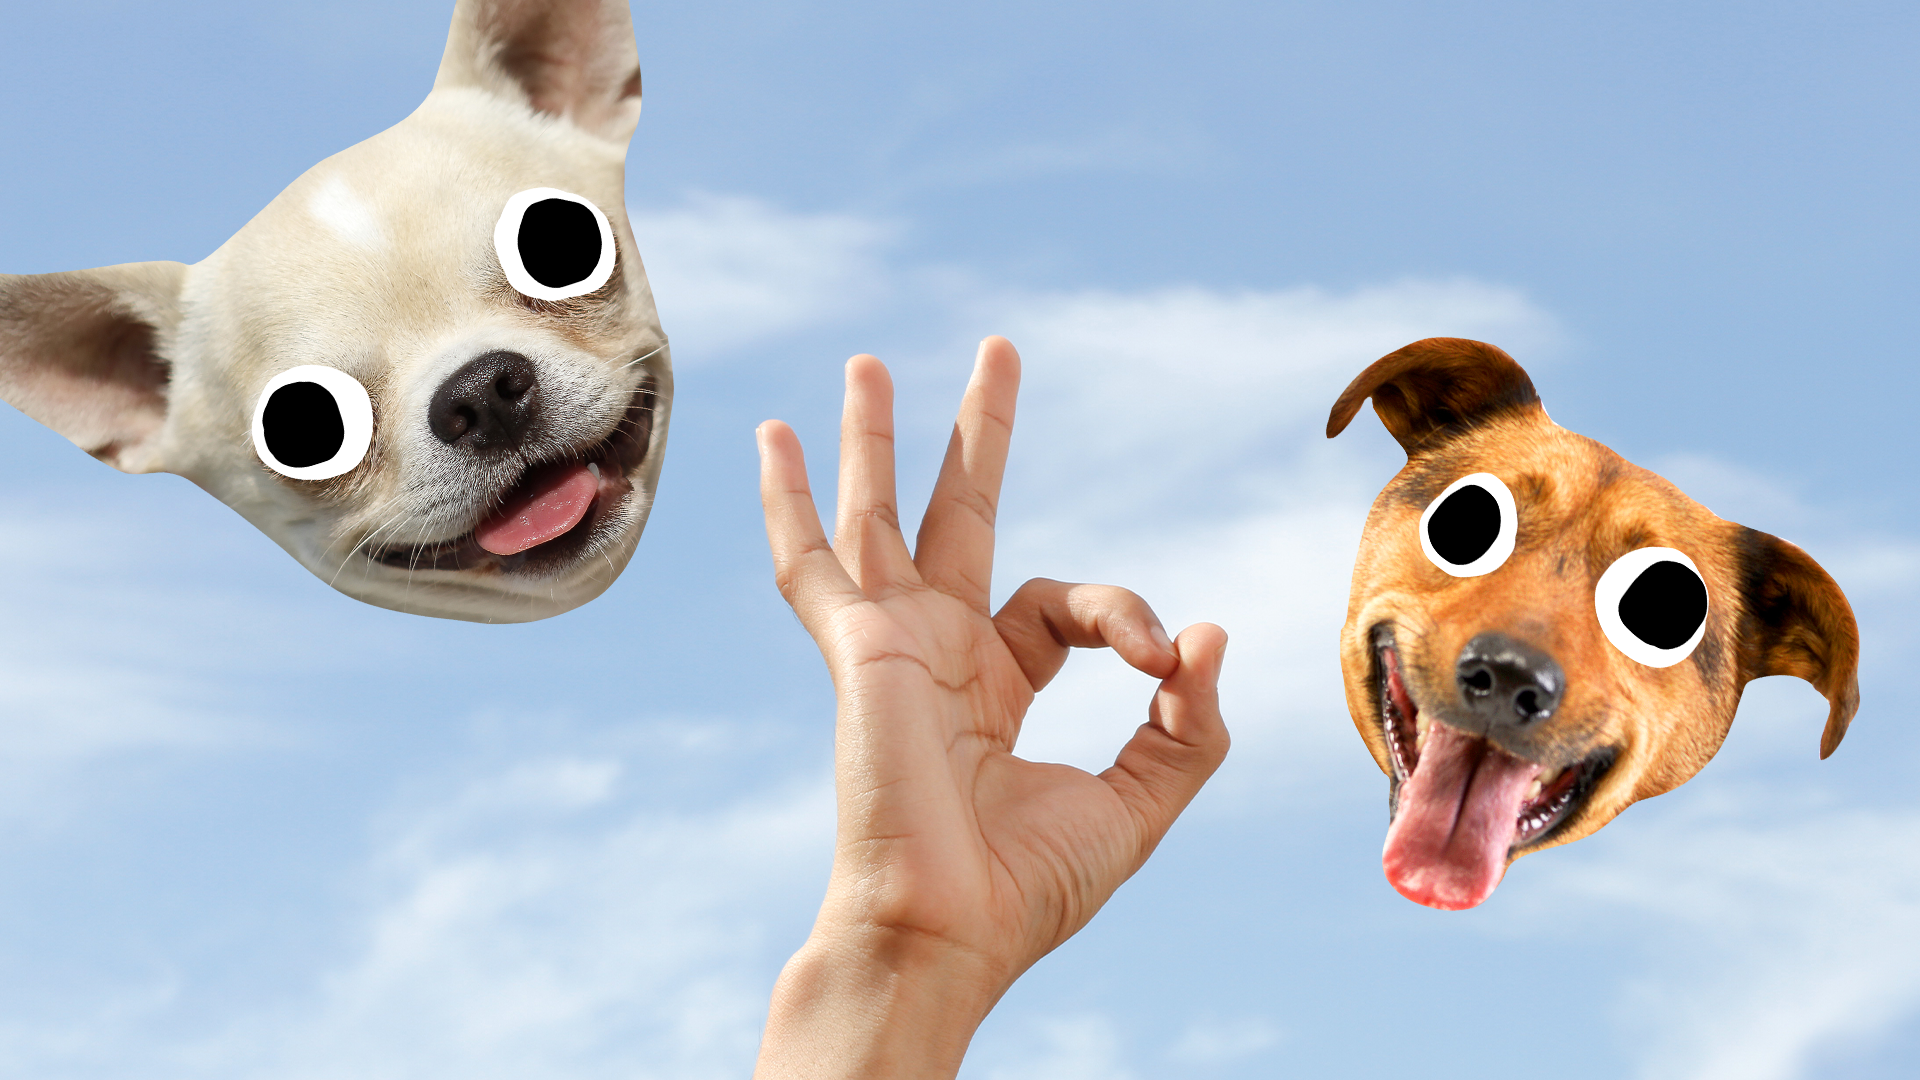 Hand doing fun sign with Beano derpy dog faces on sky background